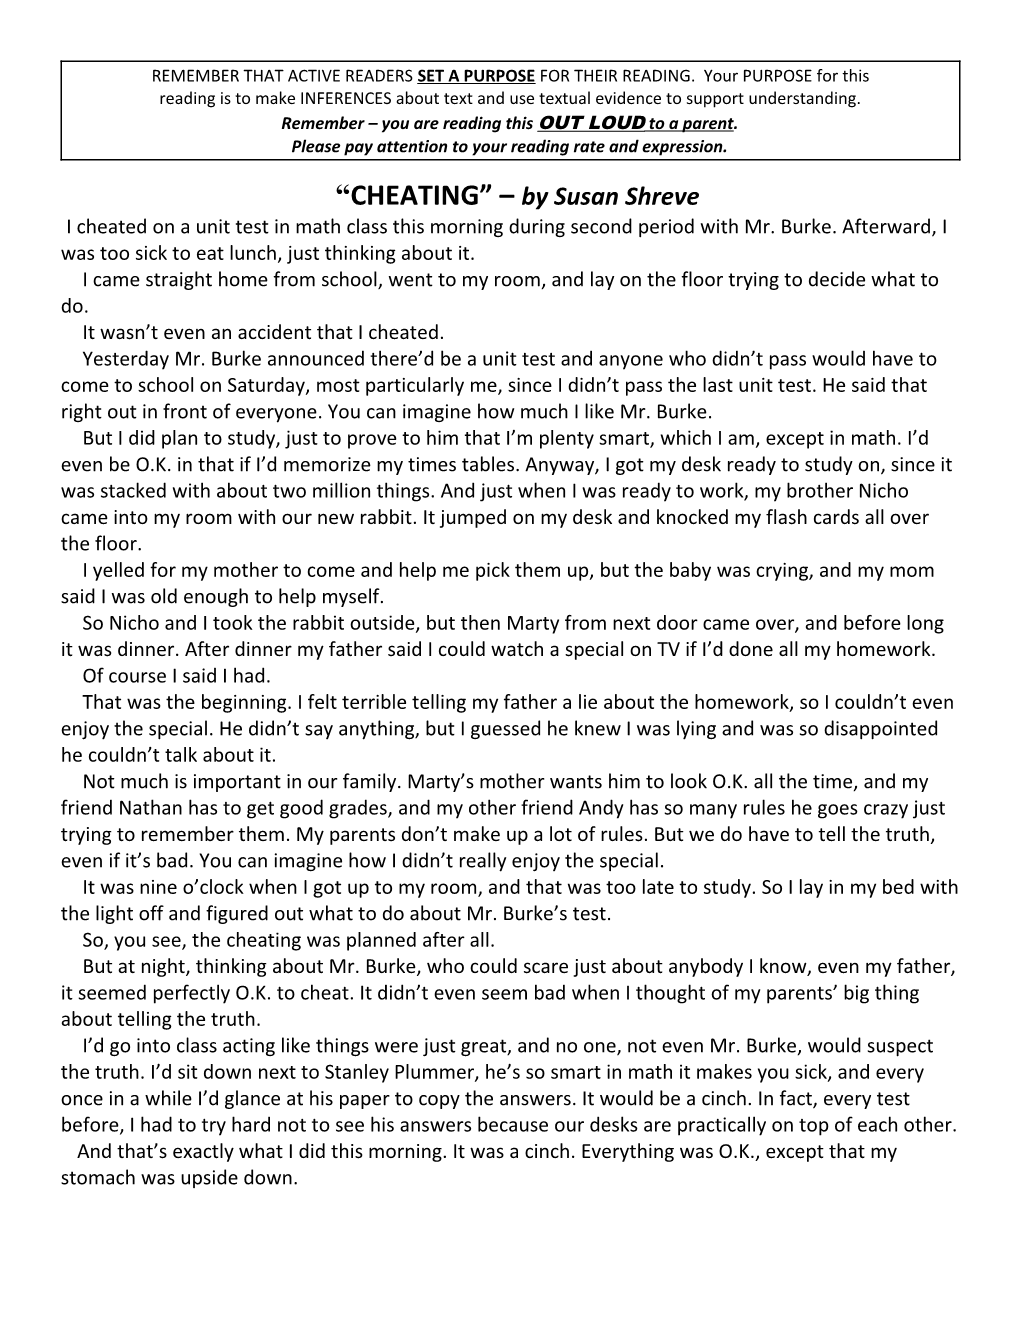 CHEATING by Susan Shreve